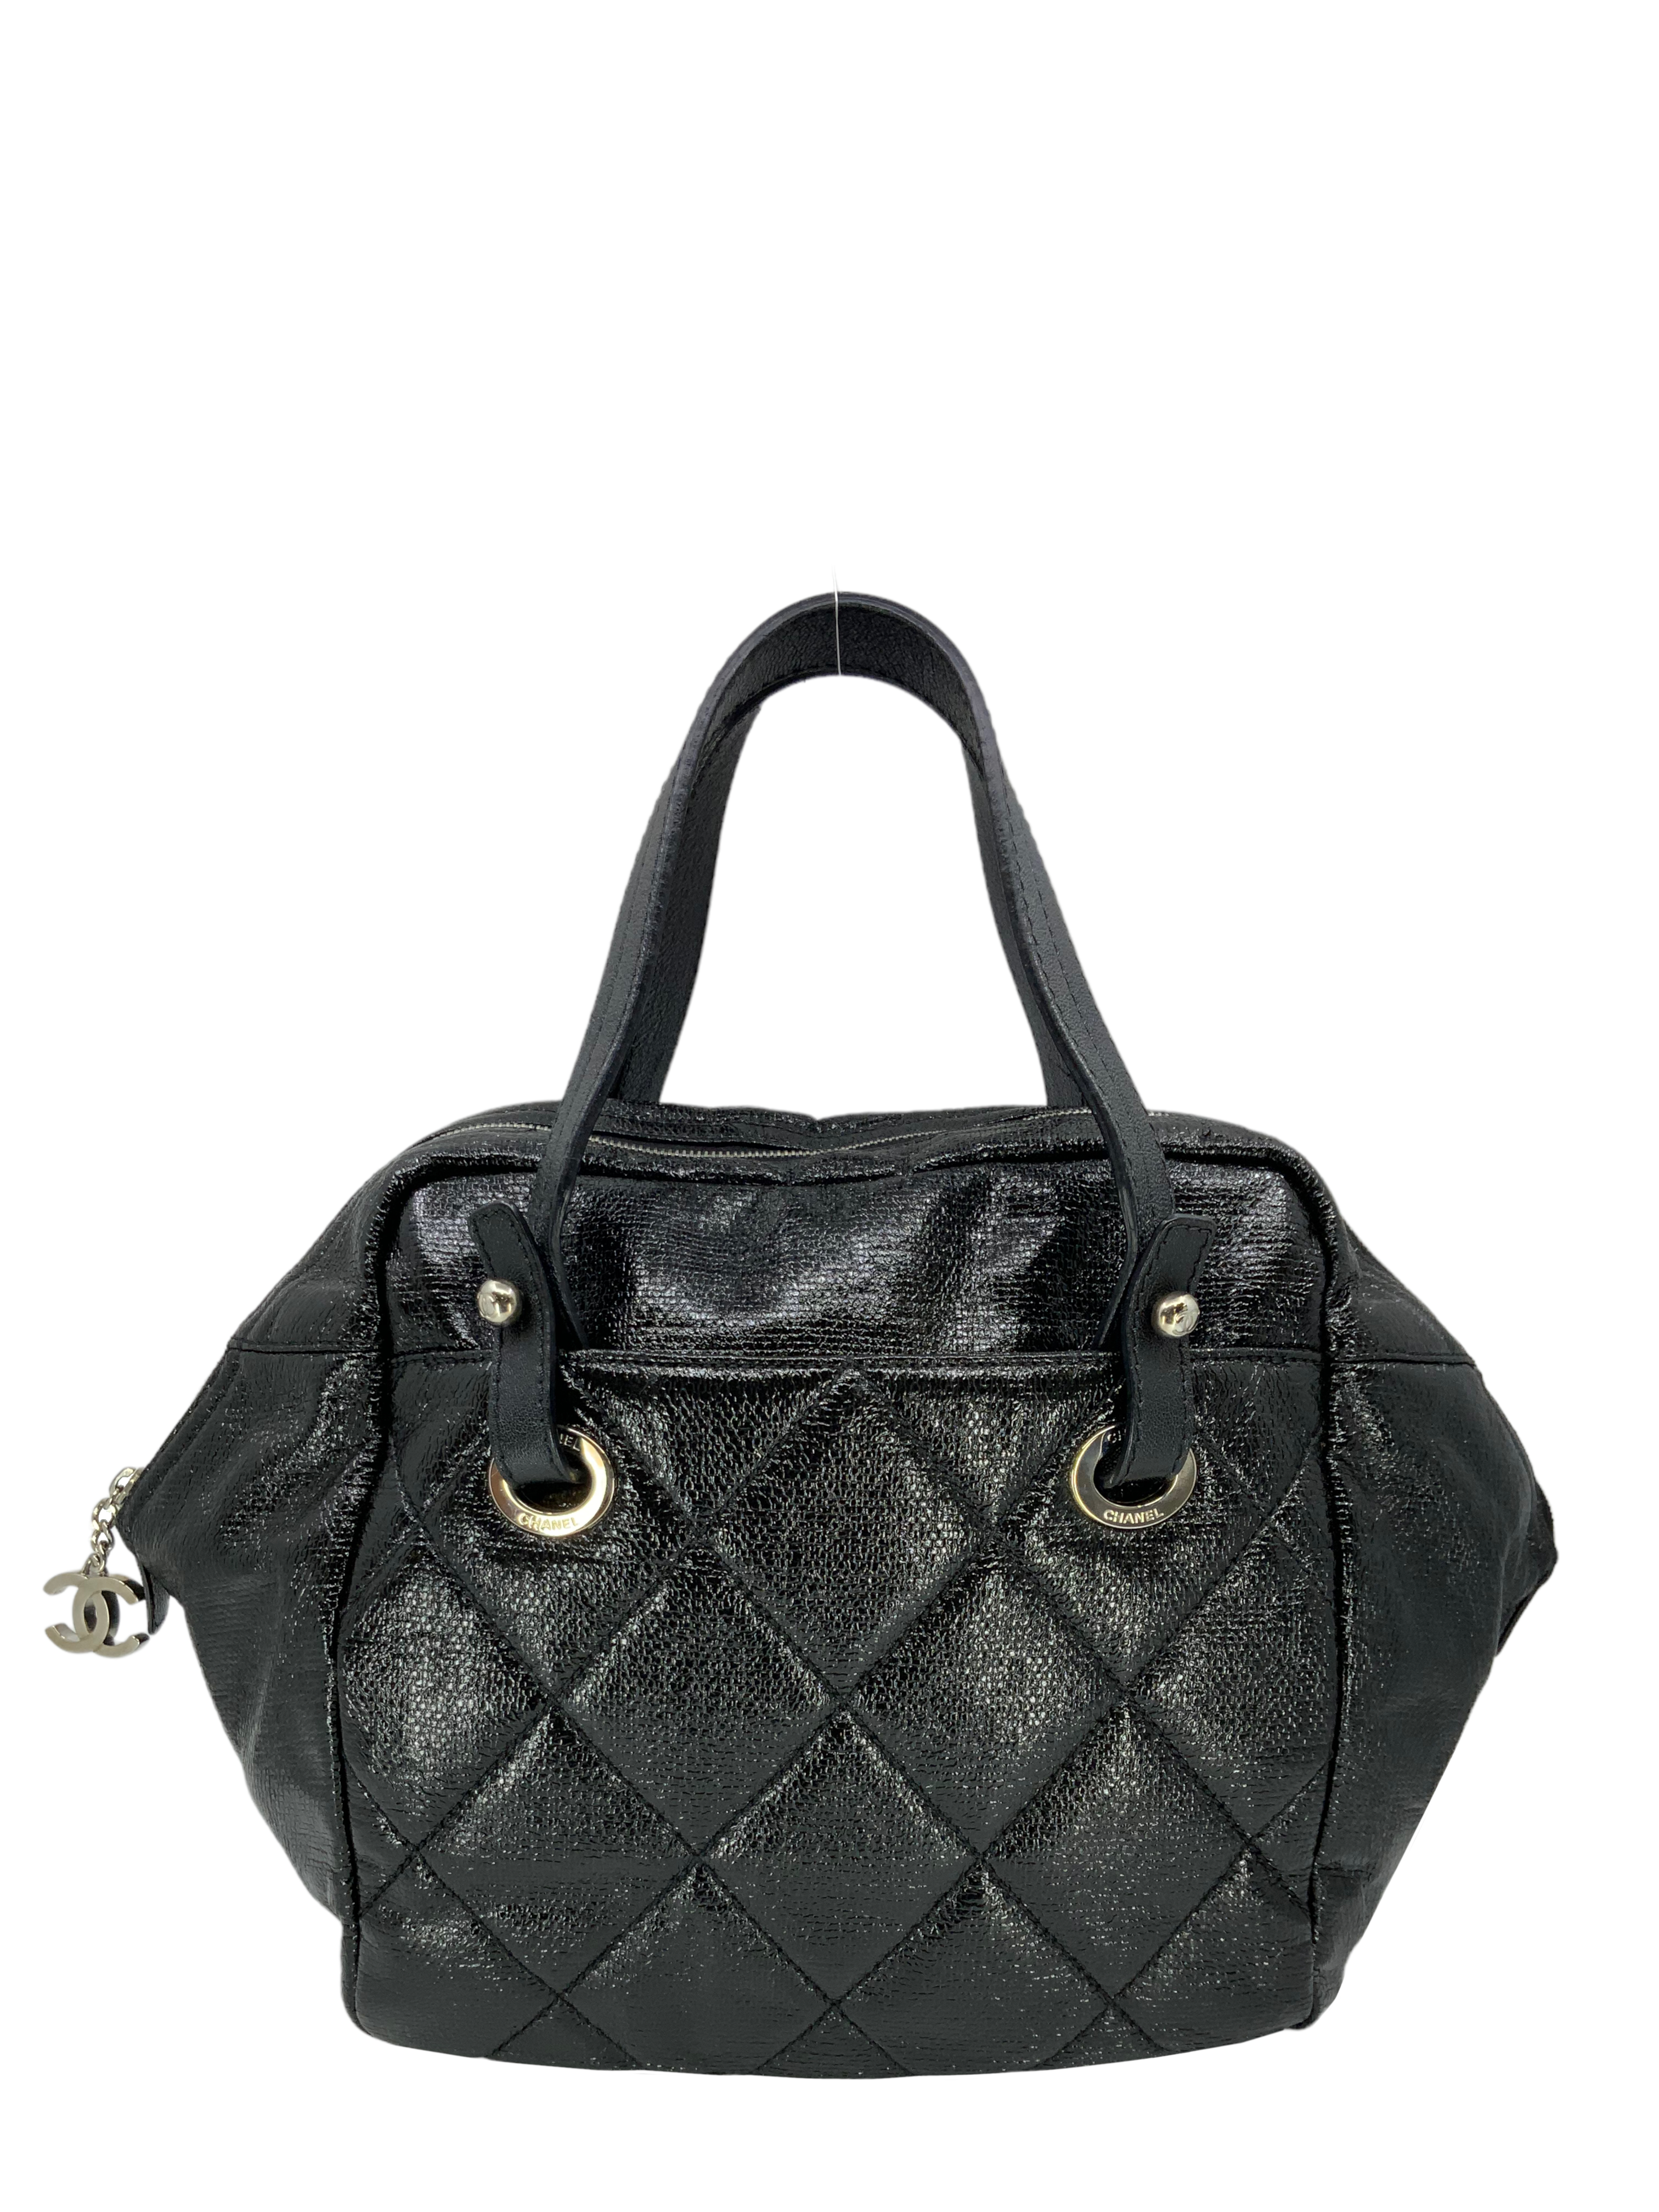 CHANEL Quilted Coated Leather Large Bowling Bag - Consigned Designs